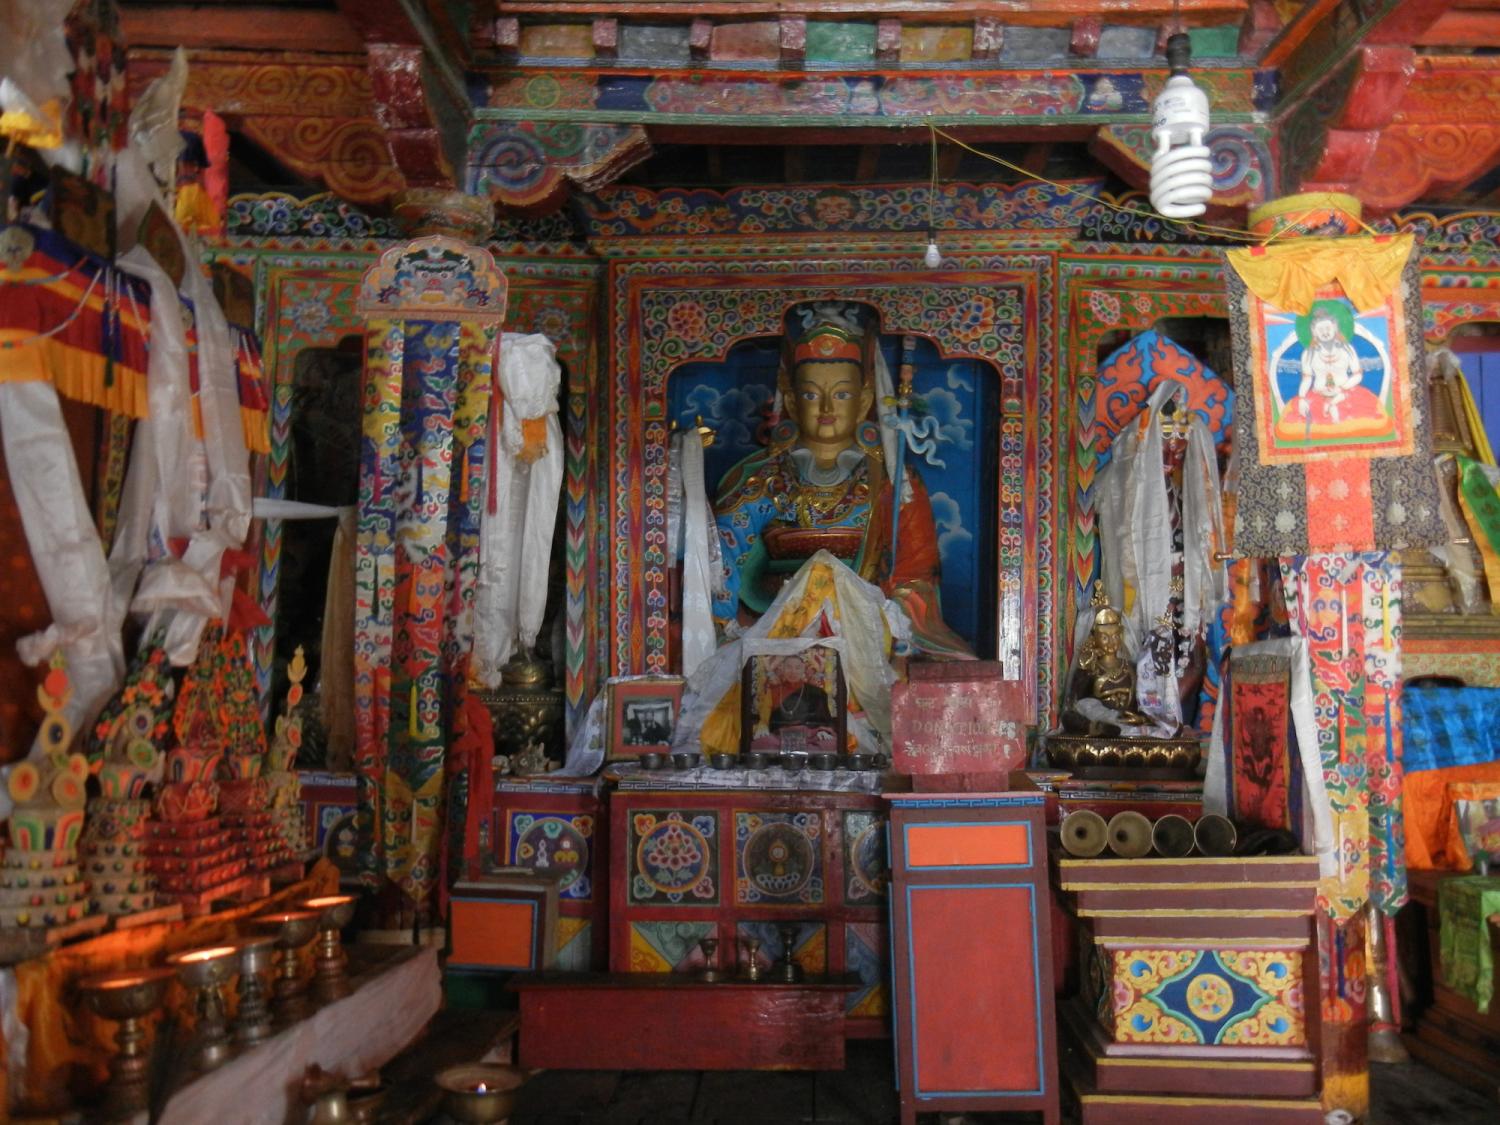 he interior of the Sama gompa. Note the image of Thangthong Gyalpo, the traditional founder of lhamo or Tibetan opera, in the upper right